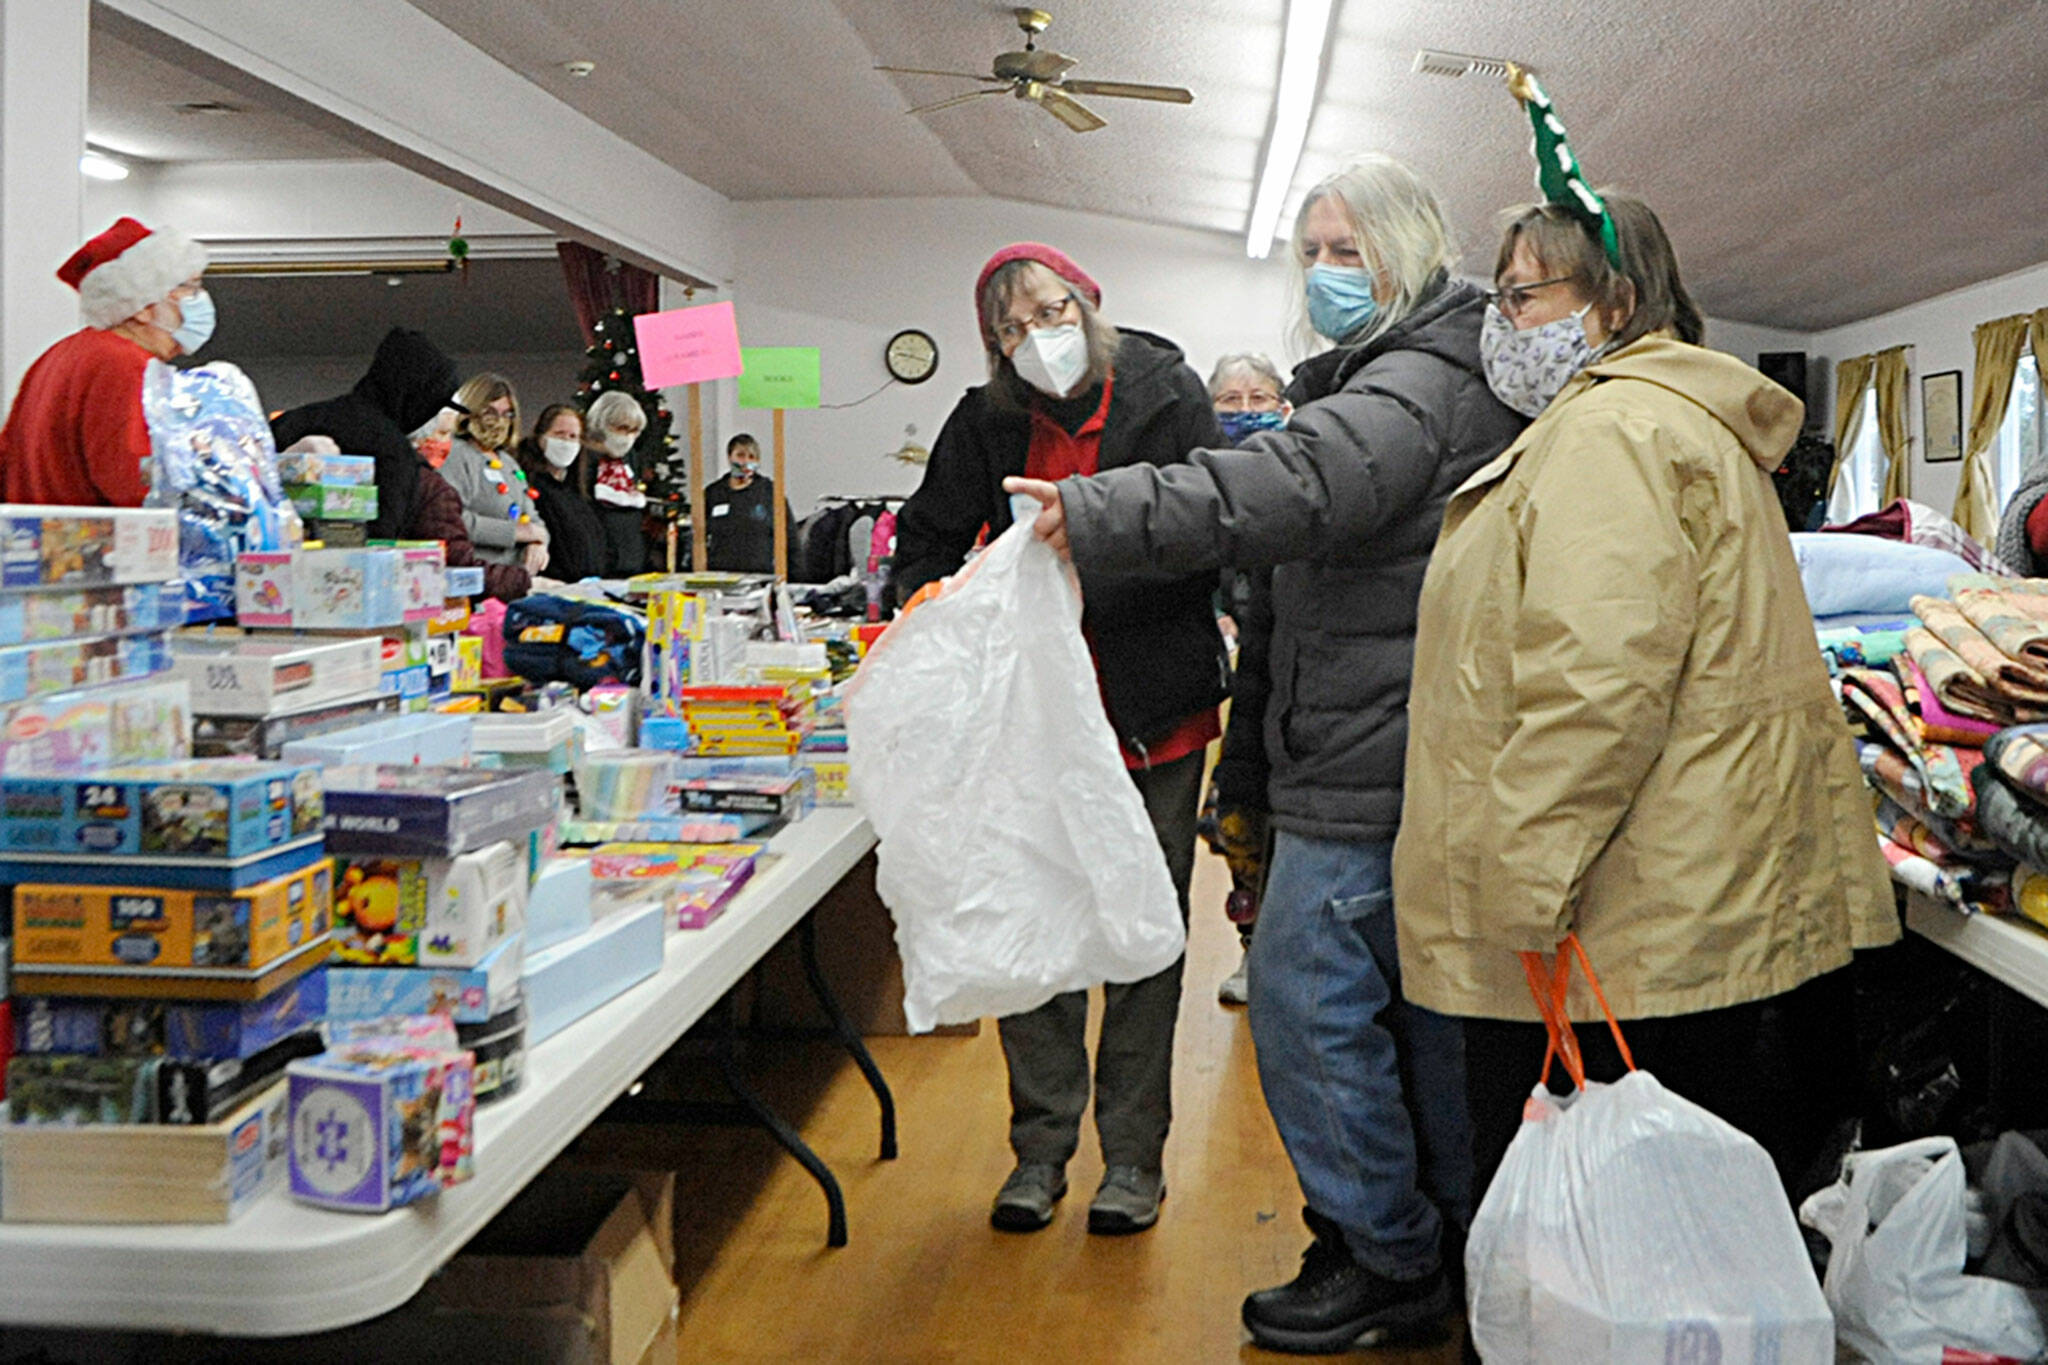 Marion Rutledge and Kathy Downer help John Eddy hunt down the best puzzles and games during Toys for Sequim Kids. Sequim Gazette photo by Matthew Nash